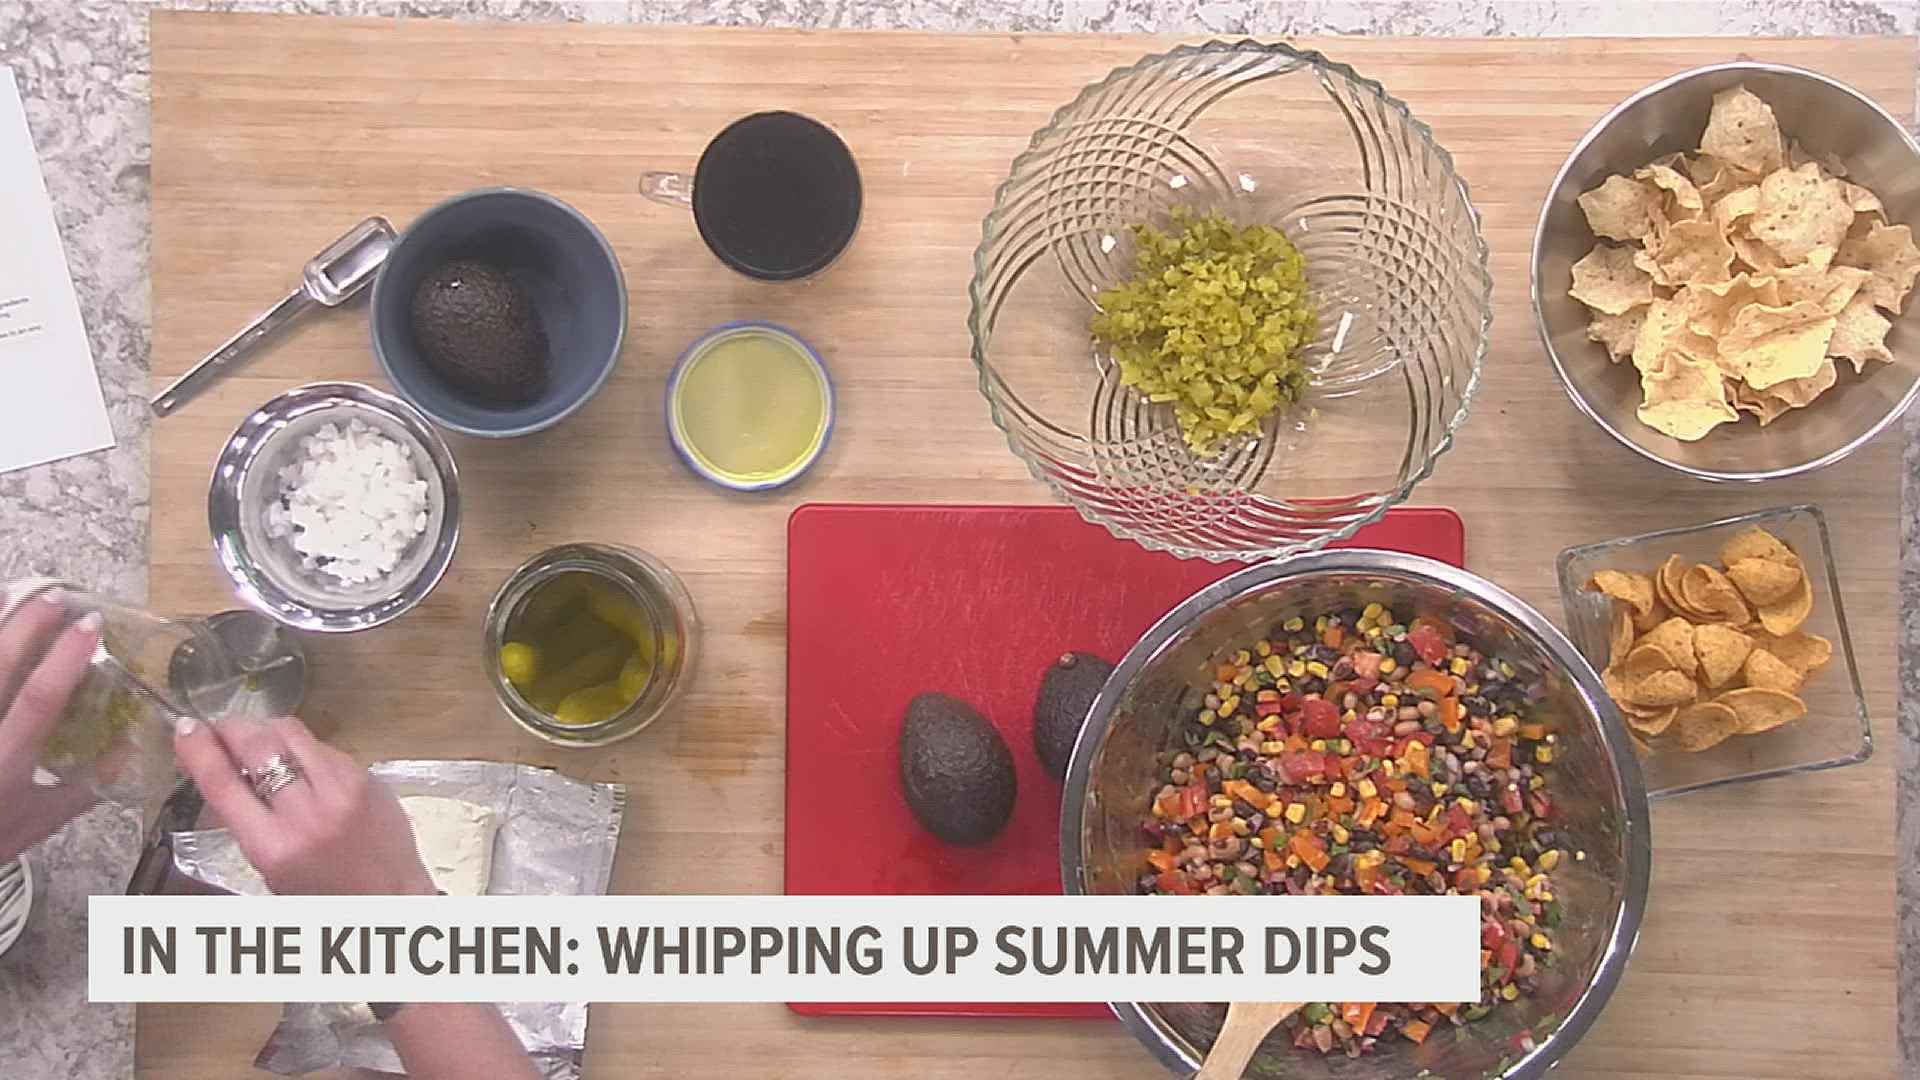 Cowboy caviar, Mexican corn and pickle dips you can enjoy while you take a dip in the pool this summer!